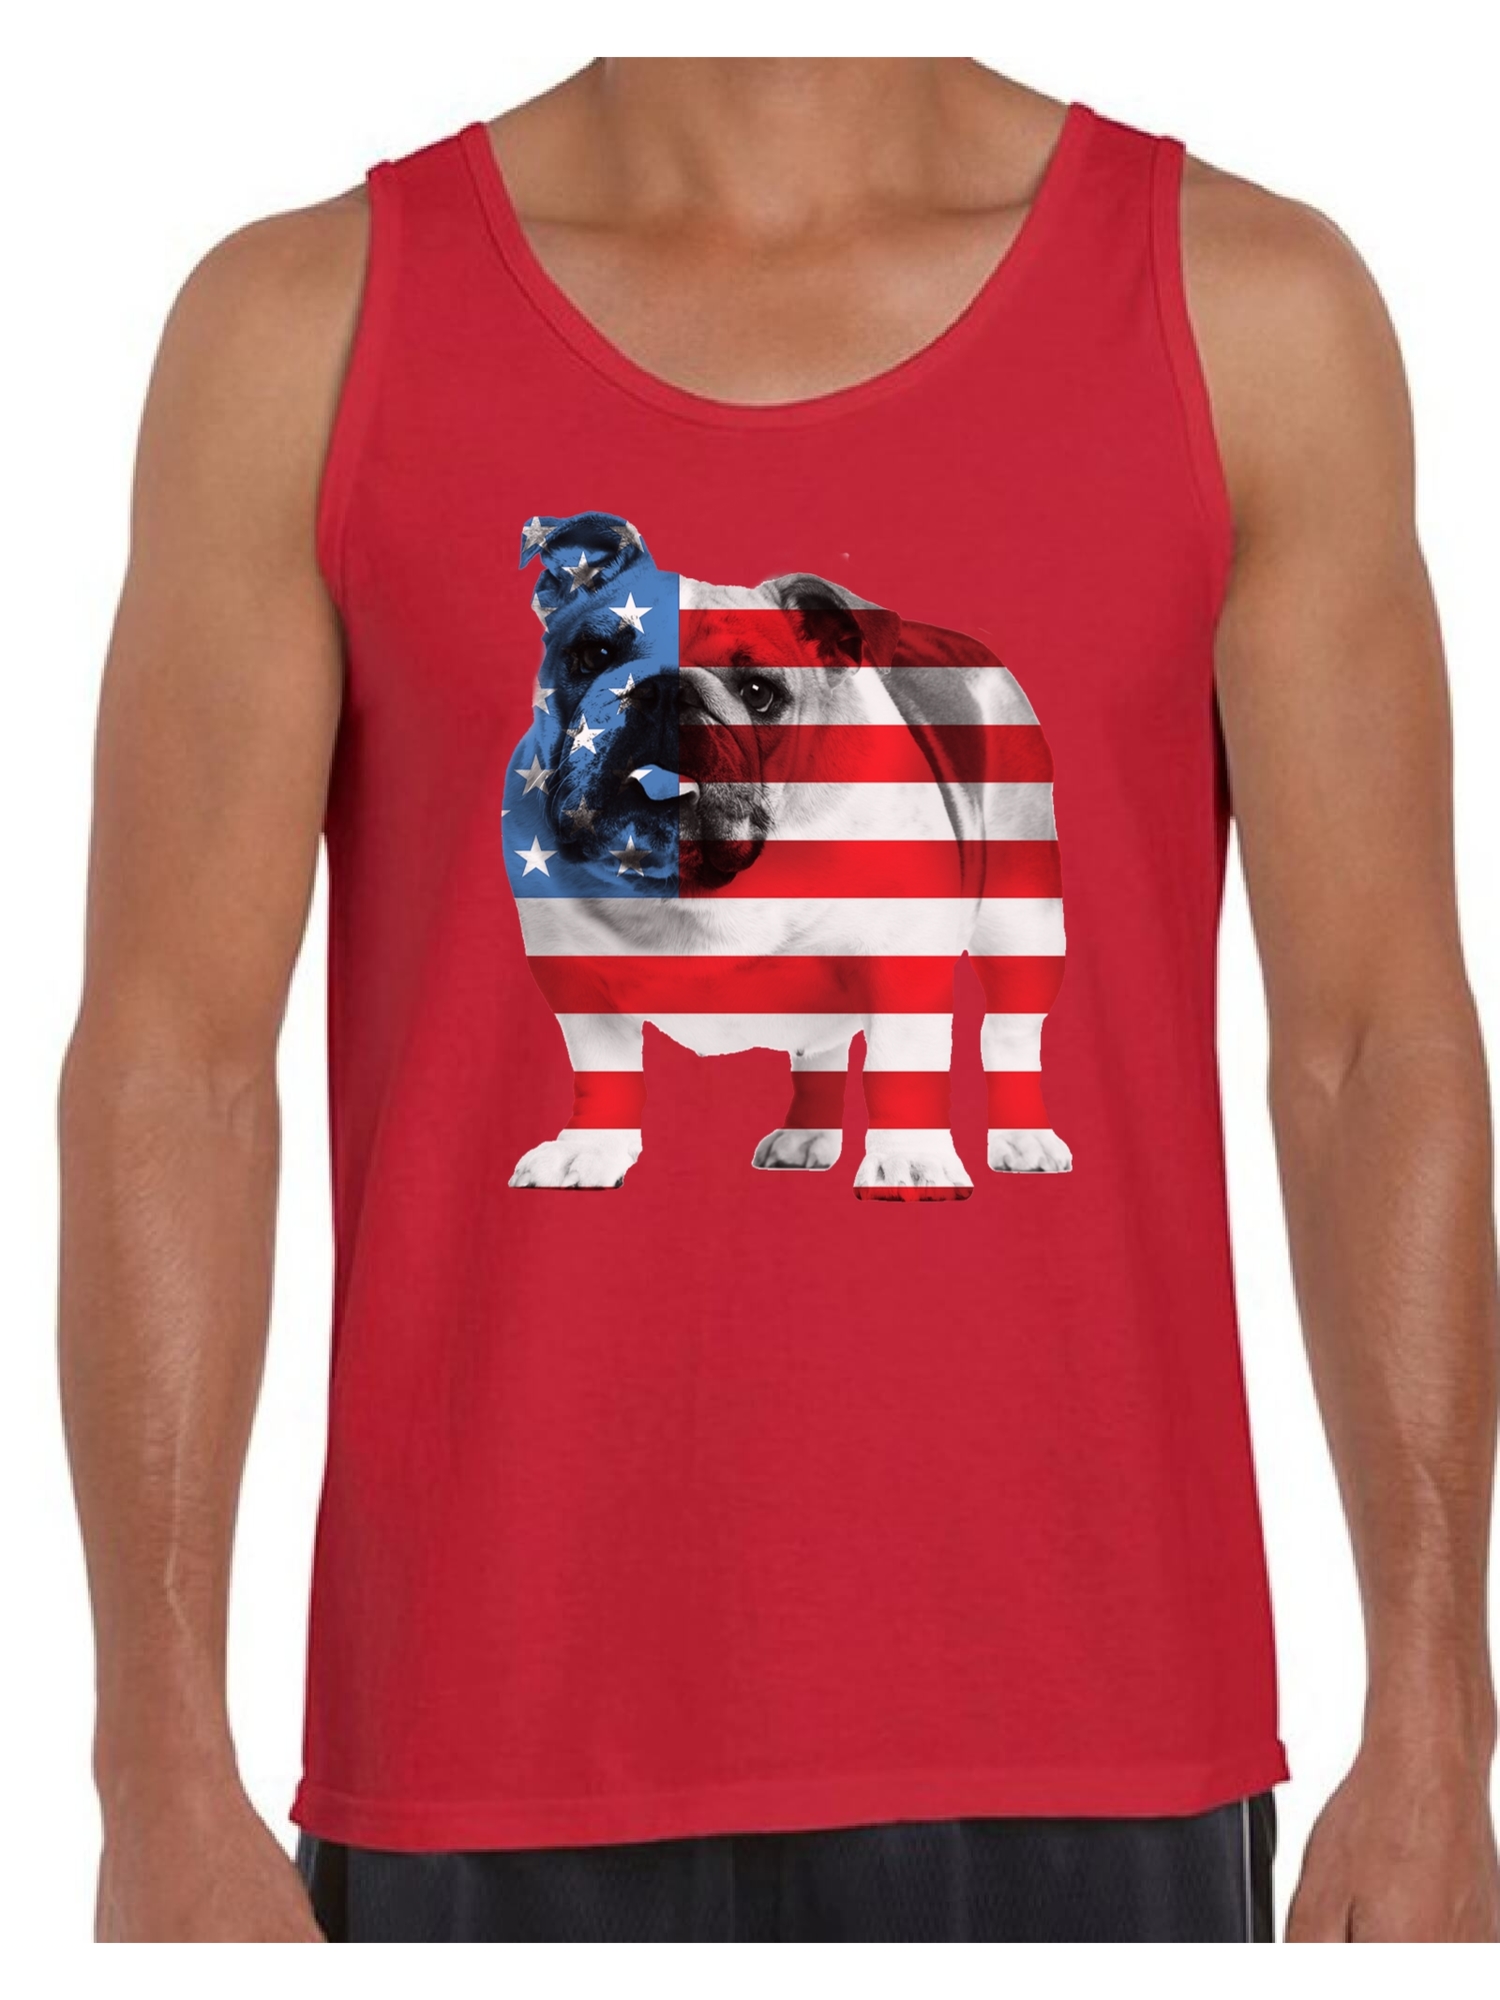 Awkward Styles American Flag Tank Tops Bulldog American Patriotic Tank Top for Men USA Flag Tanks 4th Of July Gifts for Dog Owners Bulldog Lover Tops Red White and Blue Patriotic Outfit - image 1 of 4